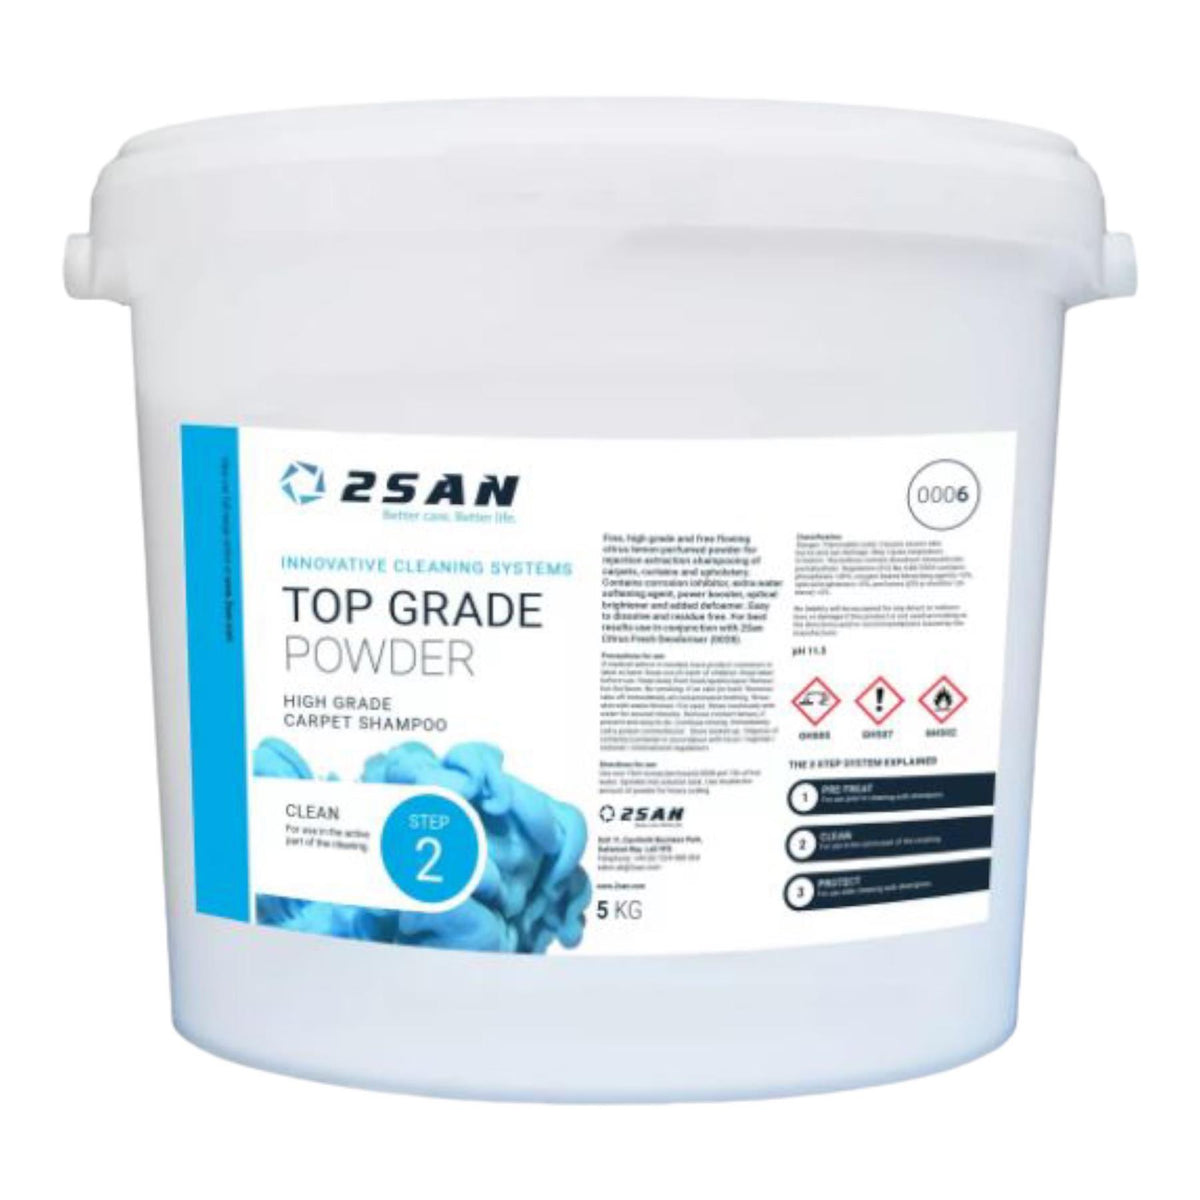 2SAN Top Grade Powder for cleaning carpets, curtains, and upholstery.